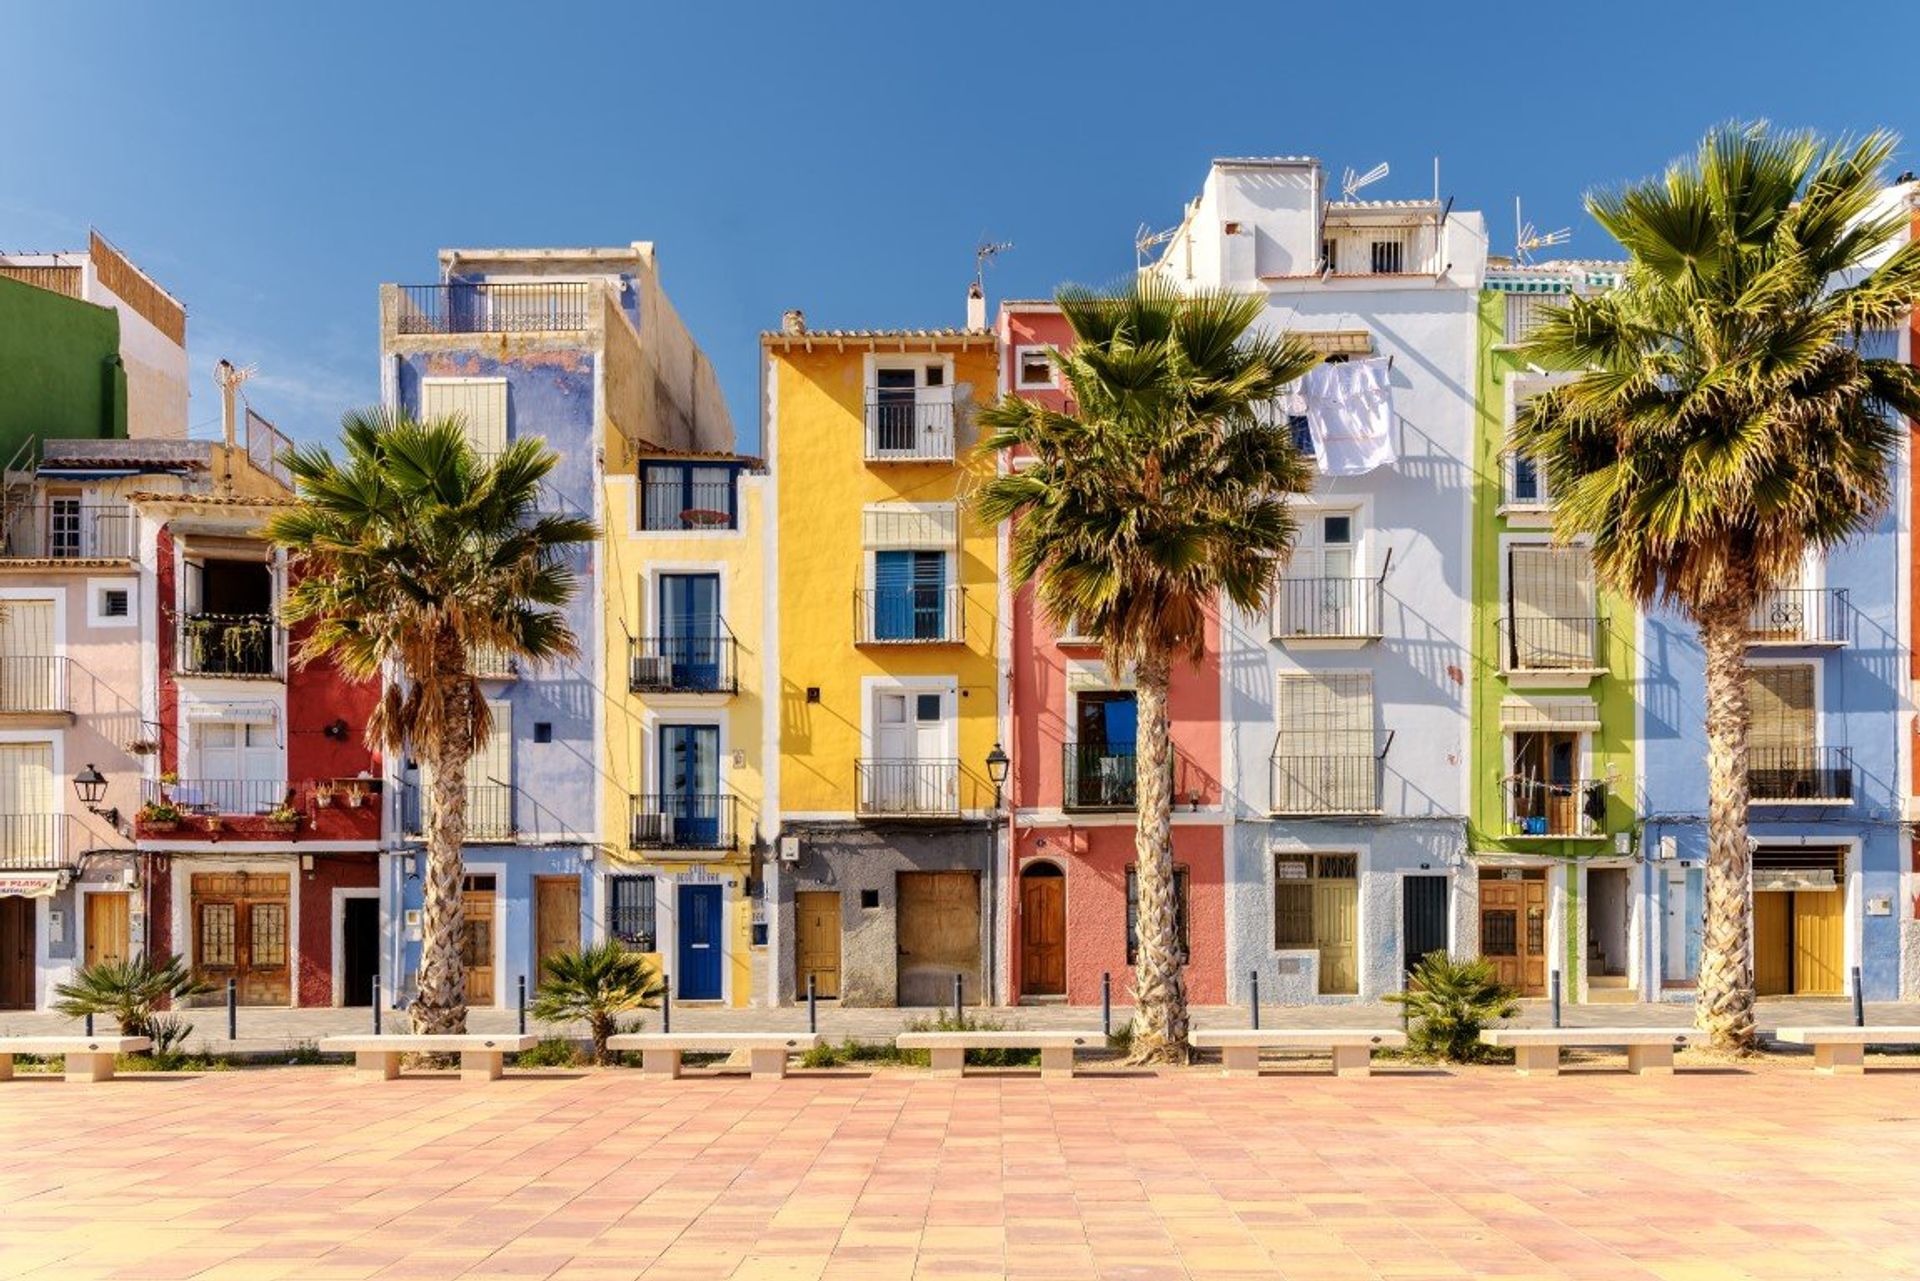 The colourful houses along the coast add authentic Spanish charm